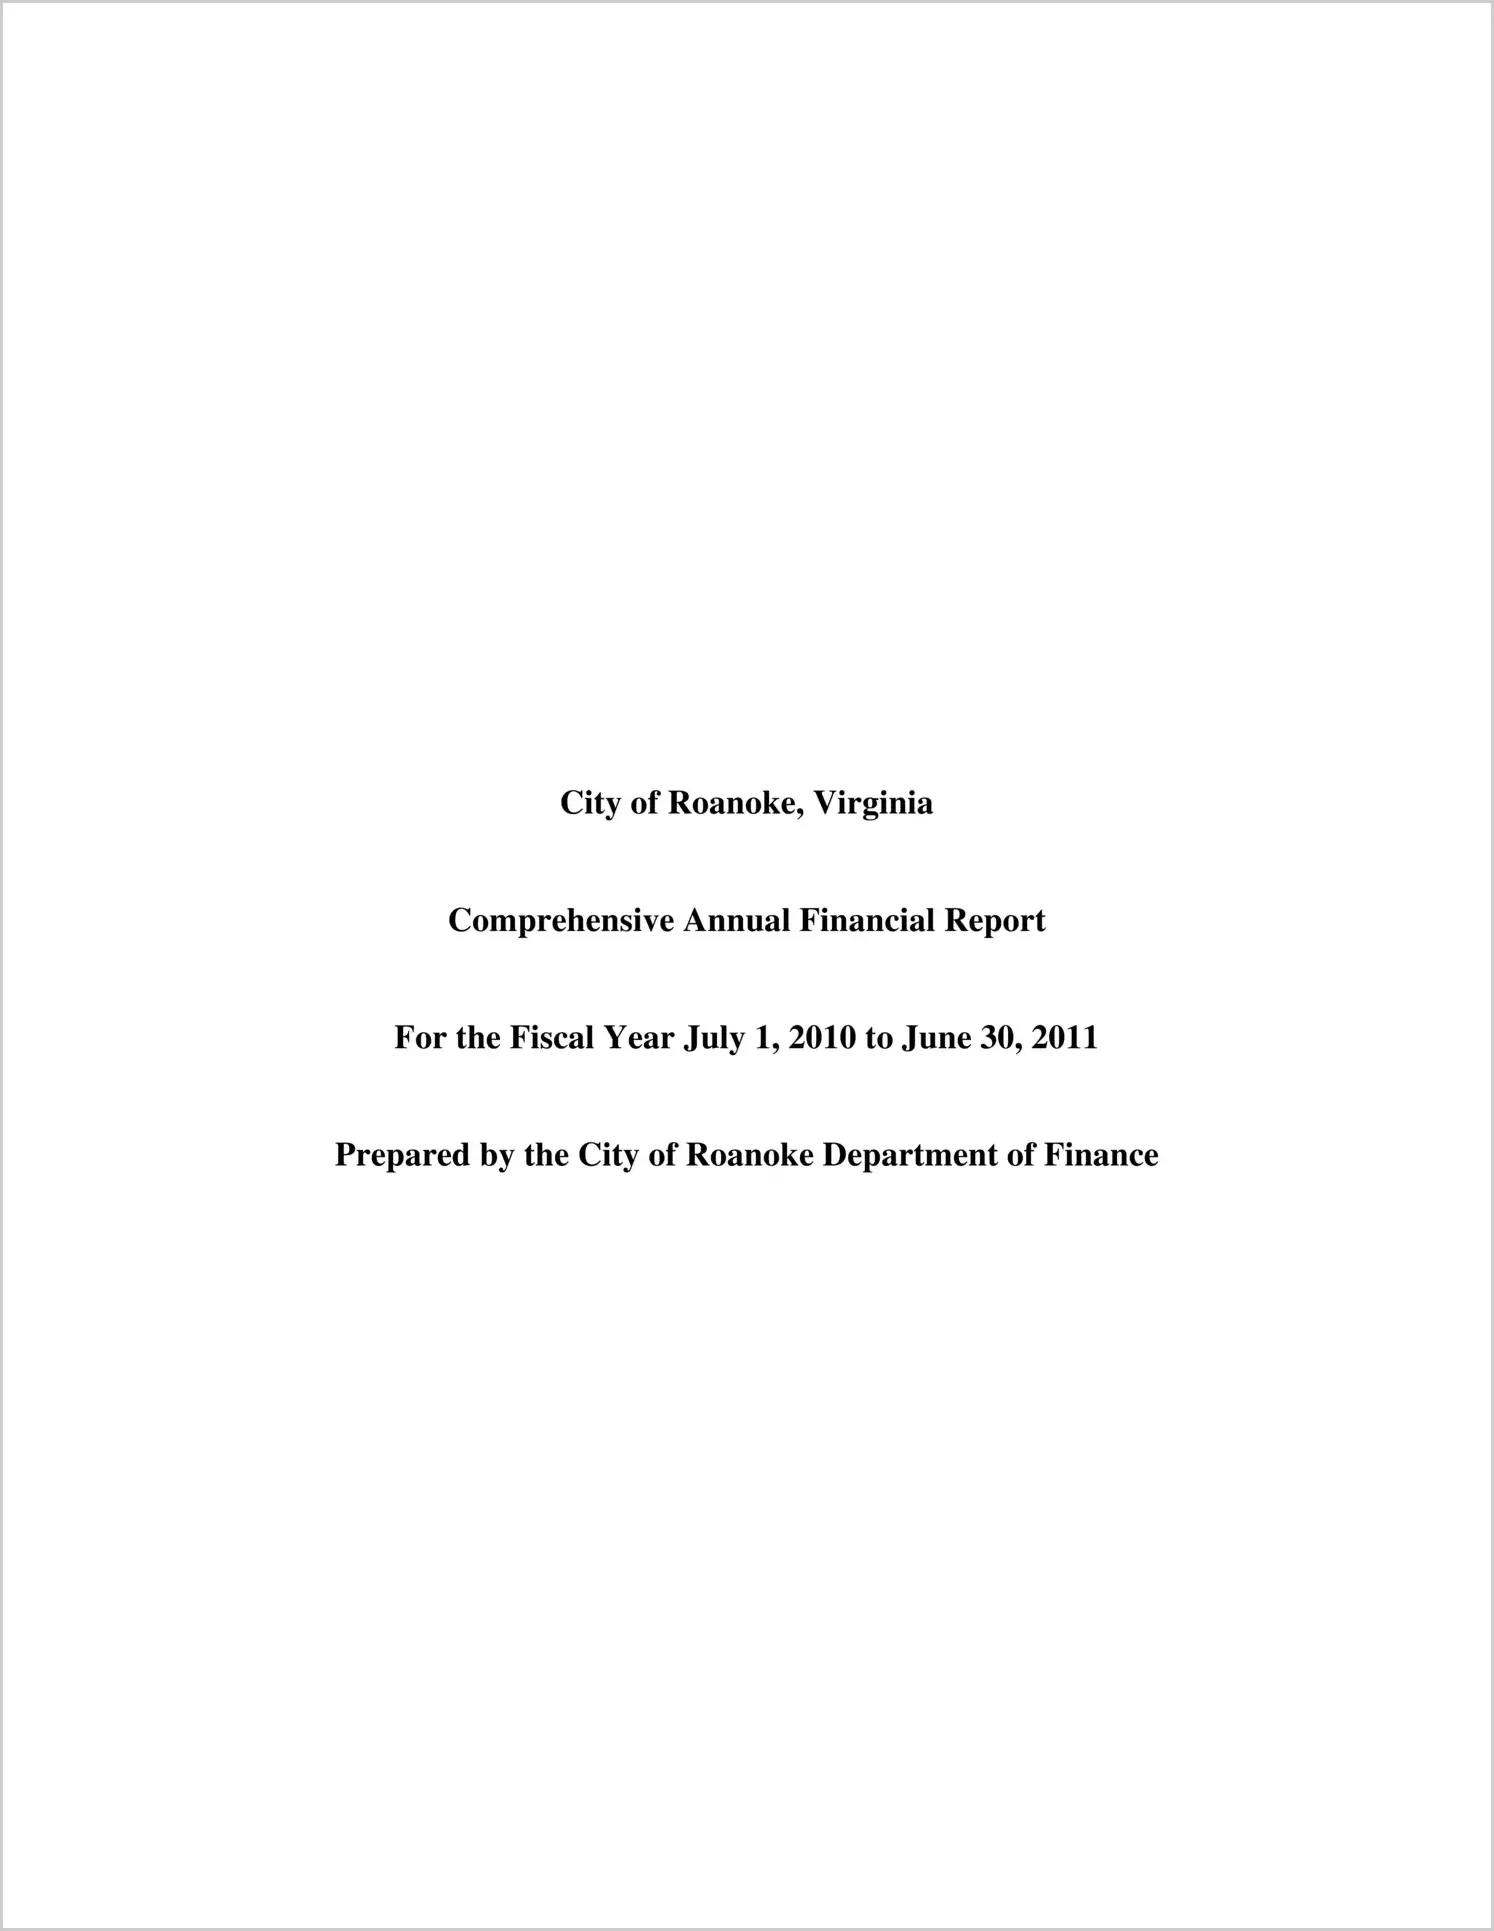 2011 Annual Financial Report for City of Roanoke